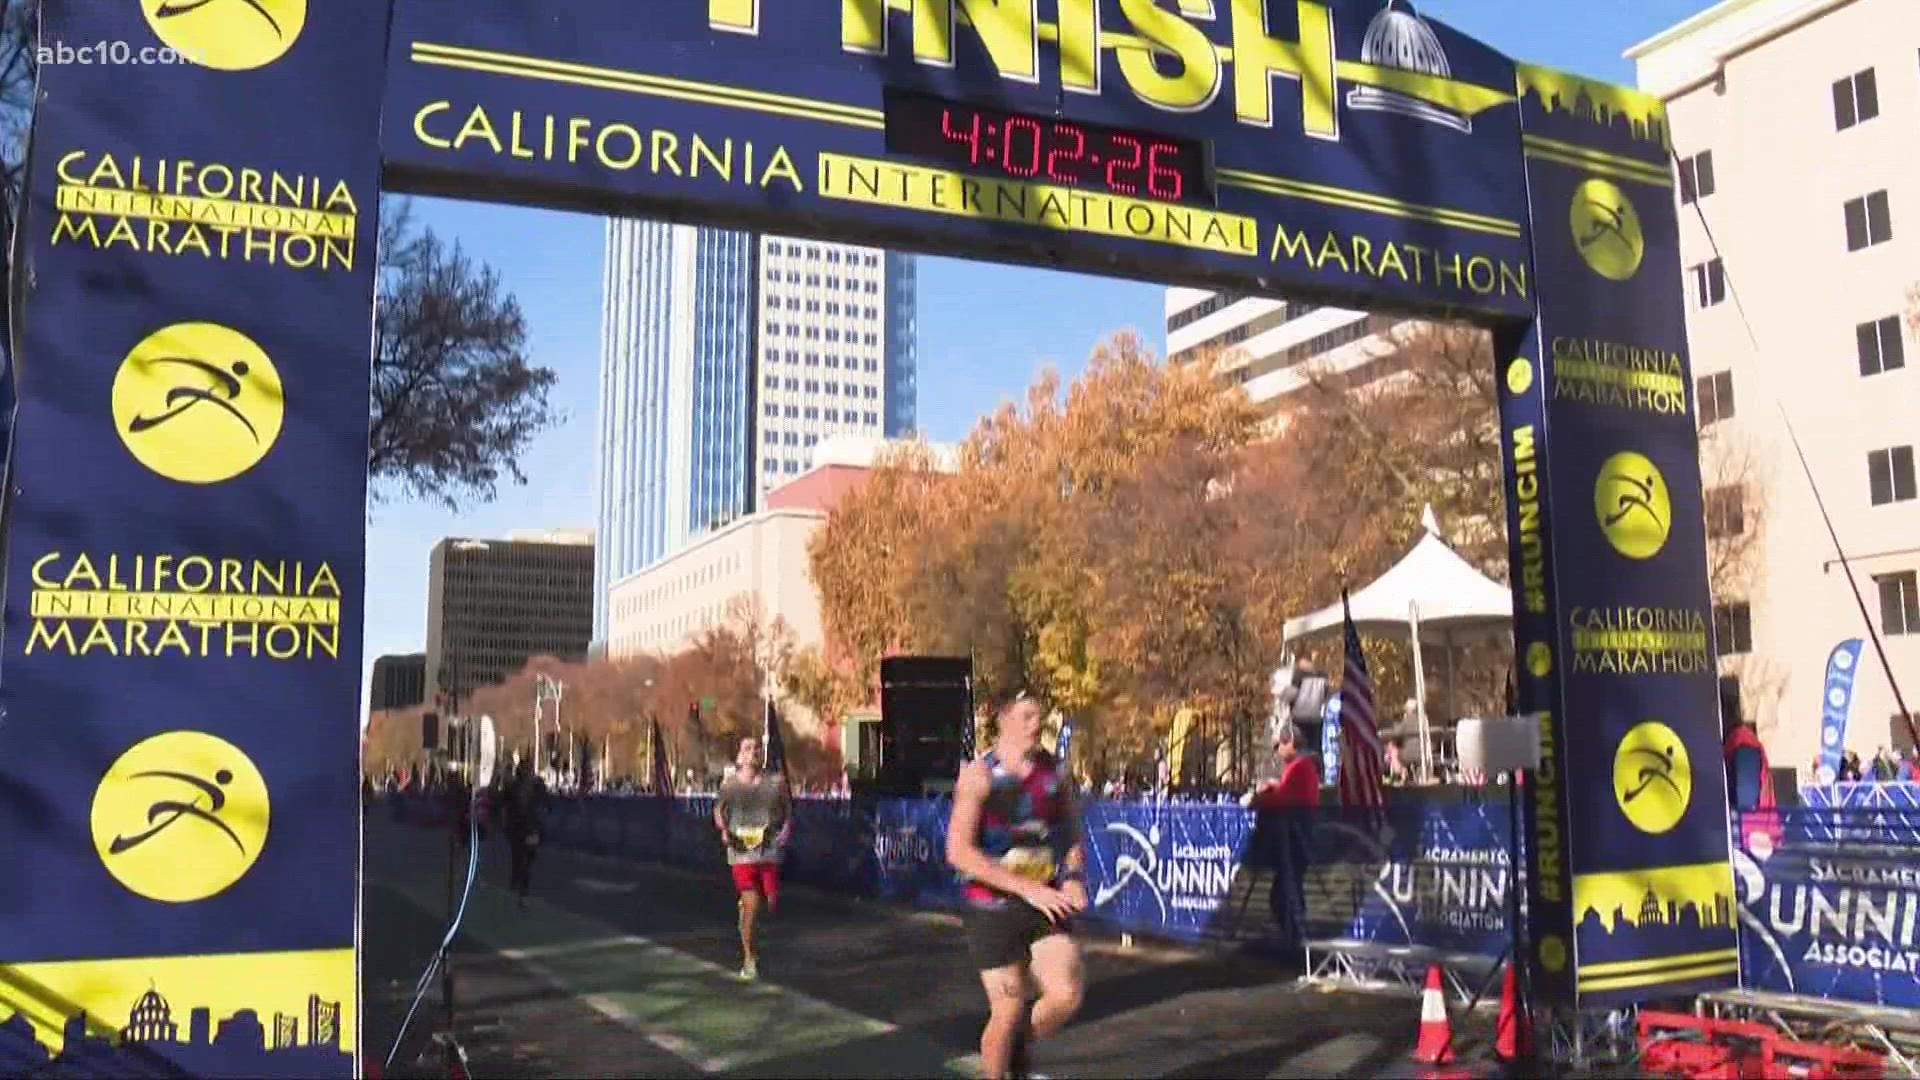 Runners will get the chance to make their journey from Folsom to Sacramento in a 26.2-mile race for the first time since the CIM was canceled in 2020.